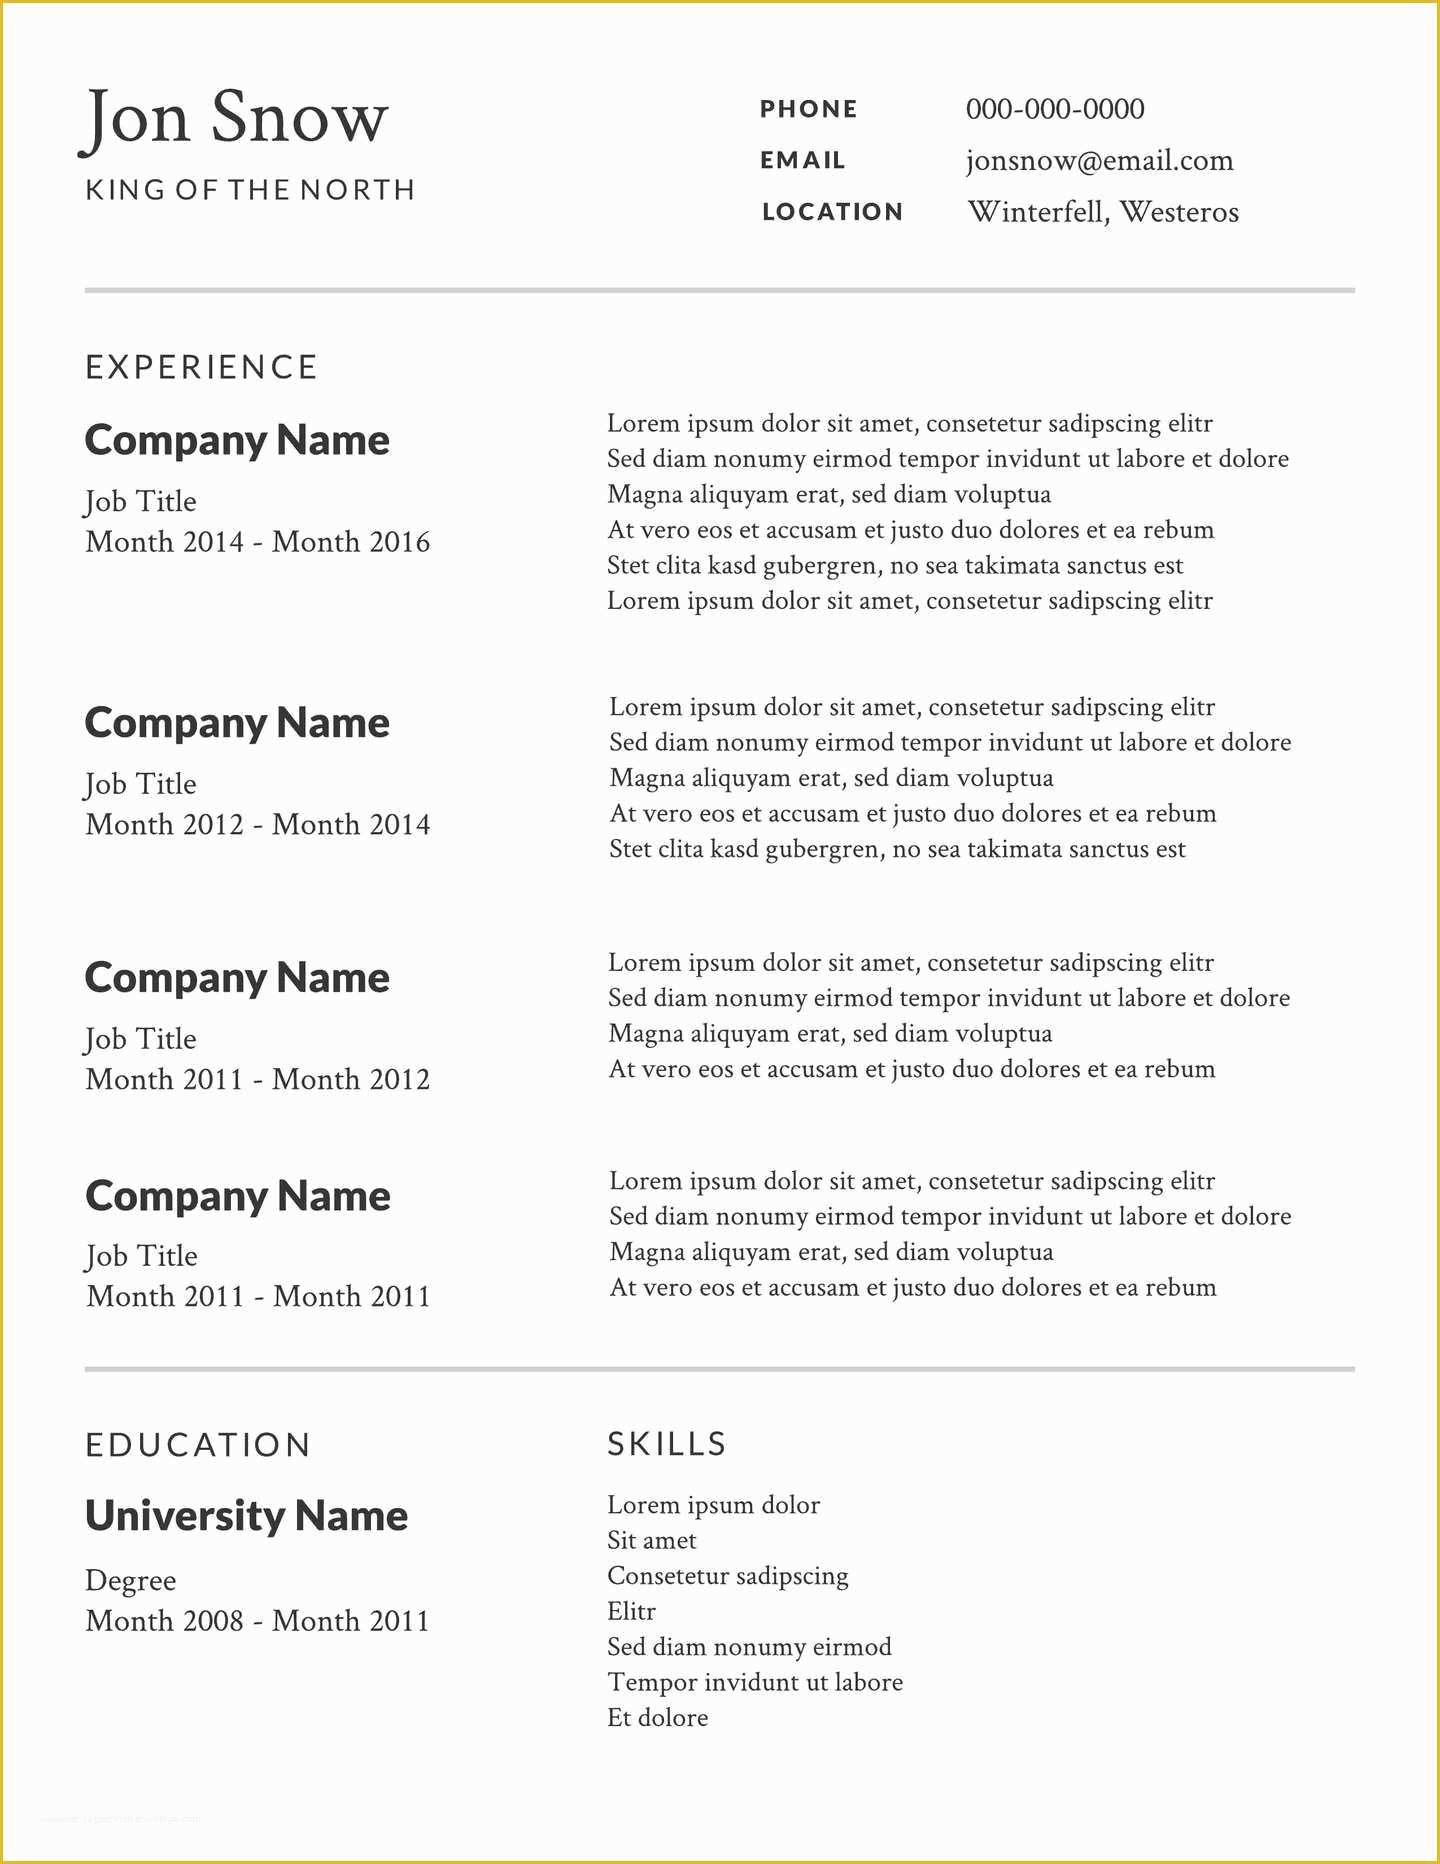 Personal Resume Template Free Of 2 Free Resume Templates & Examples Lucidpress